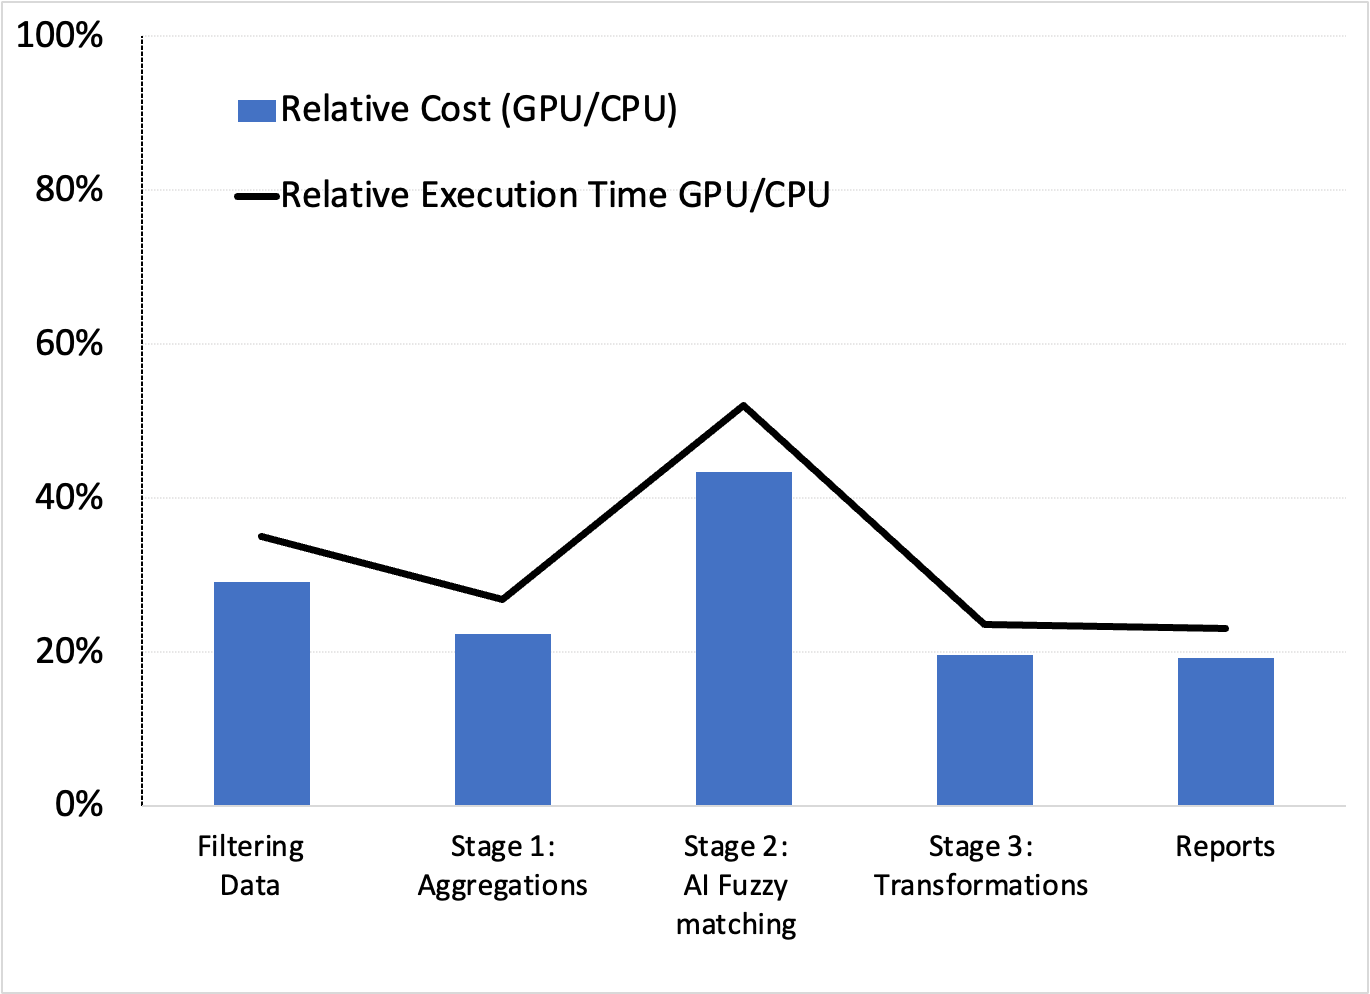 Bar chart and Line chart showing relative cost and execution time of GPUs compared to CPUs.